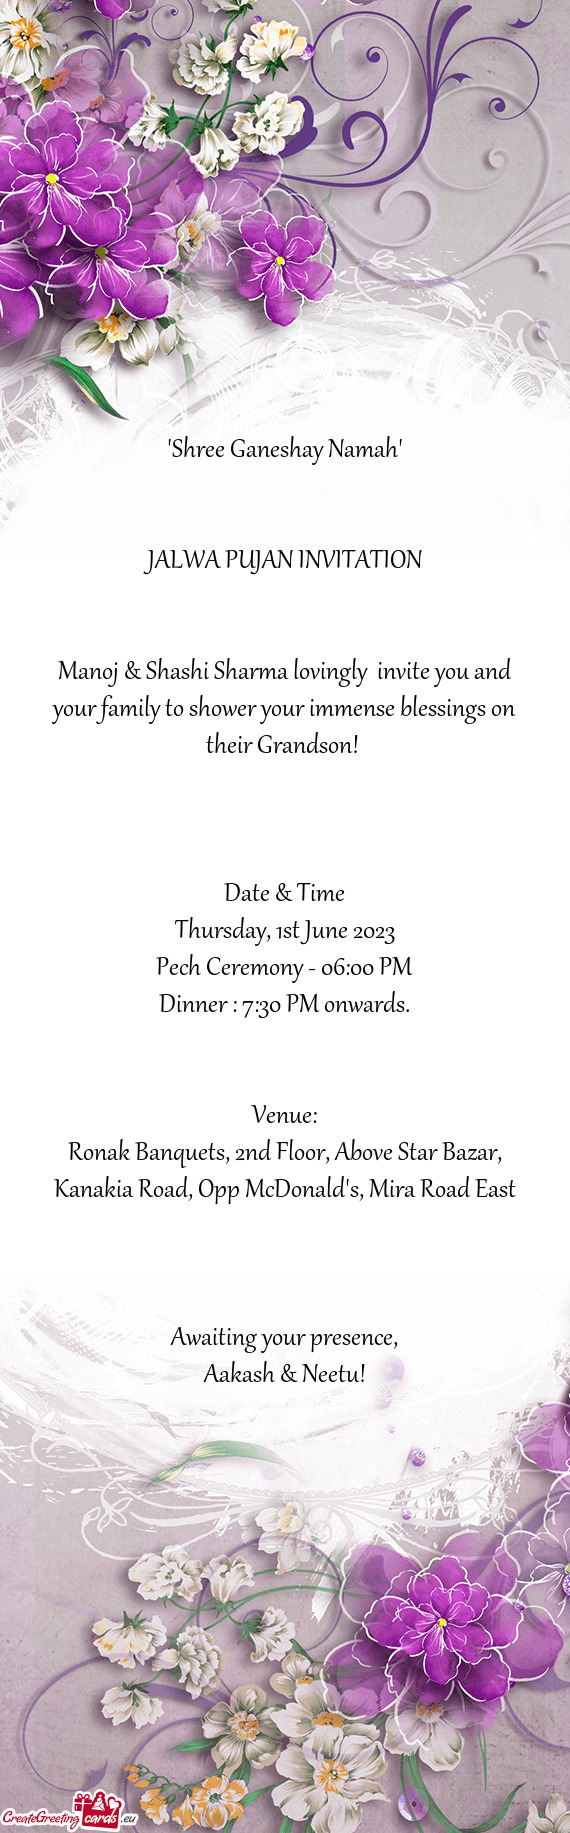 Manoj & Shashi Sharma lovingly invite you and your family to shower your immense blessings on their